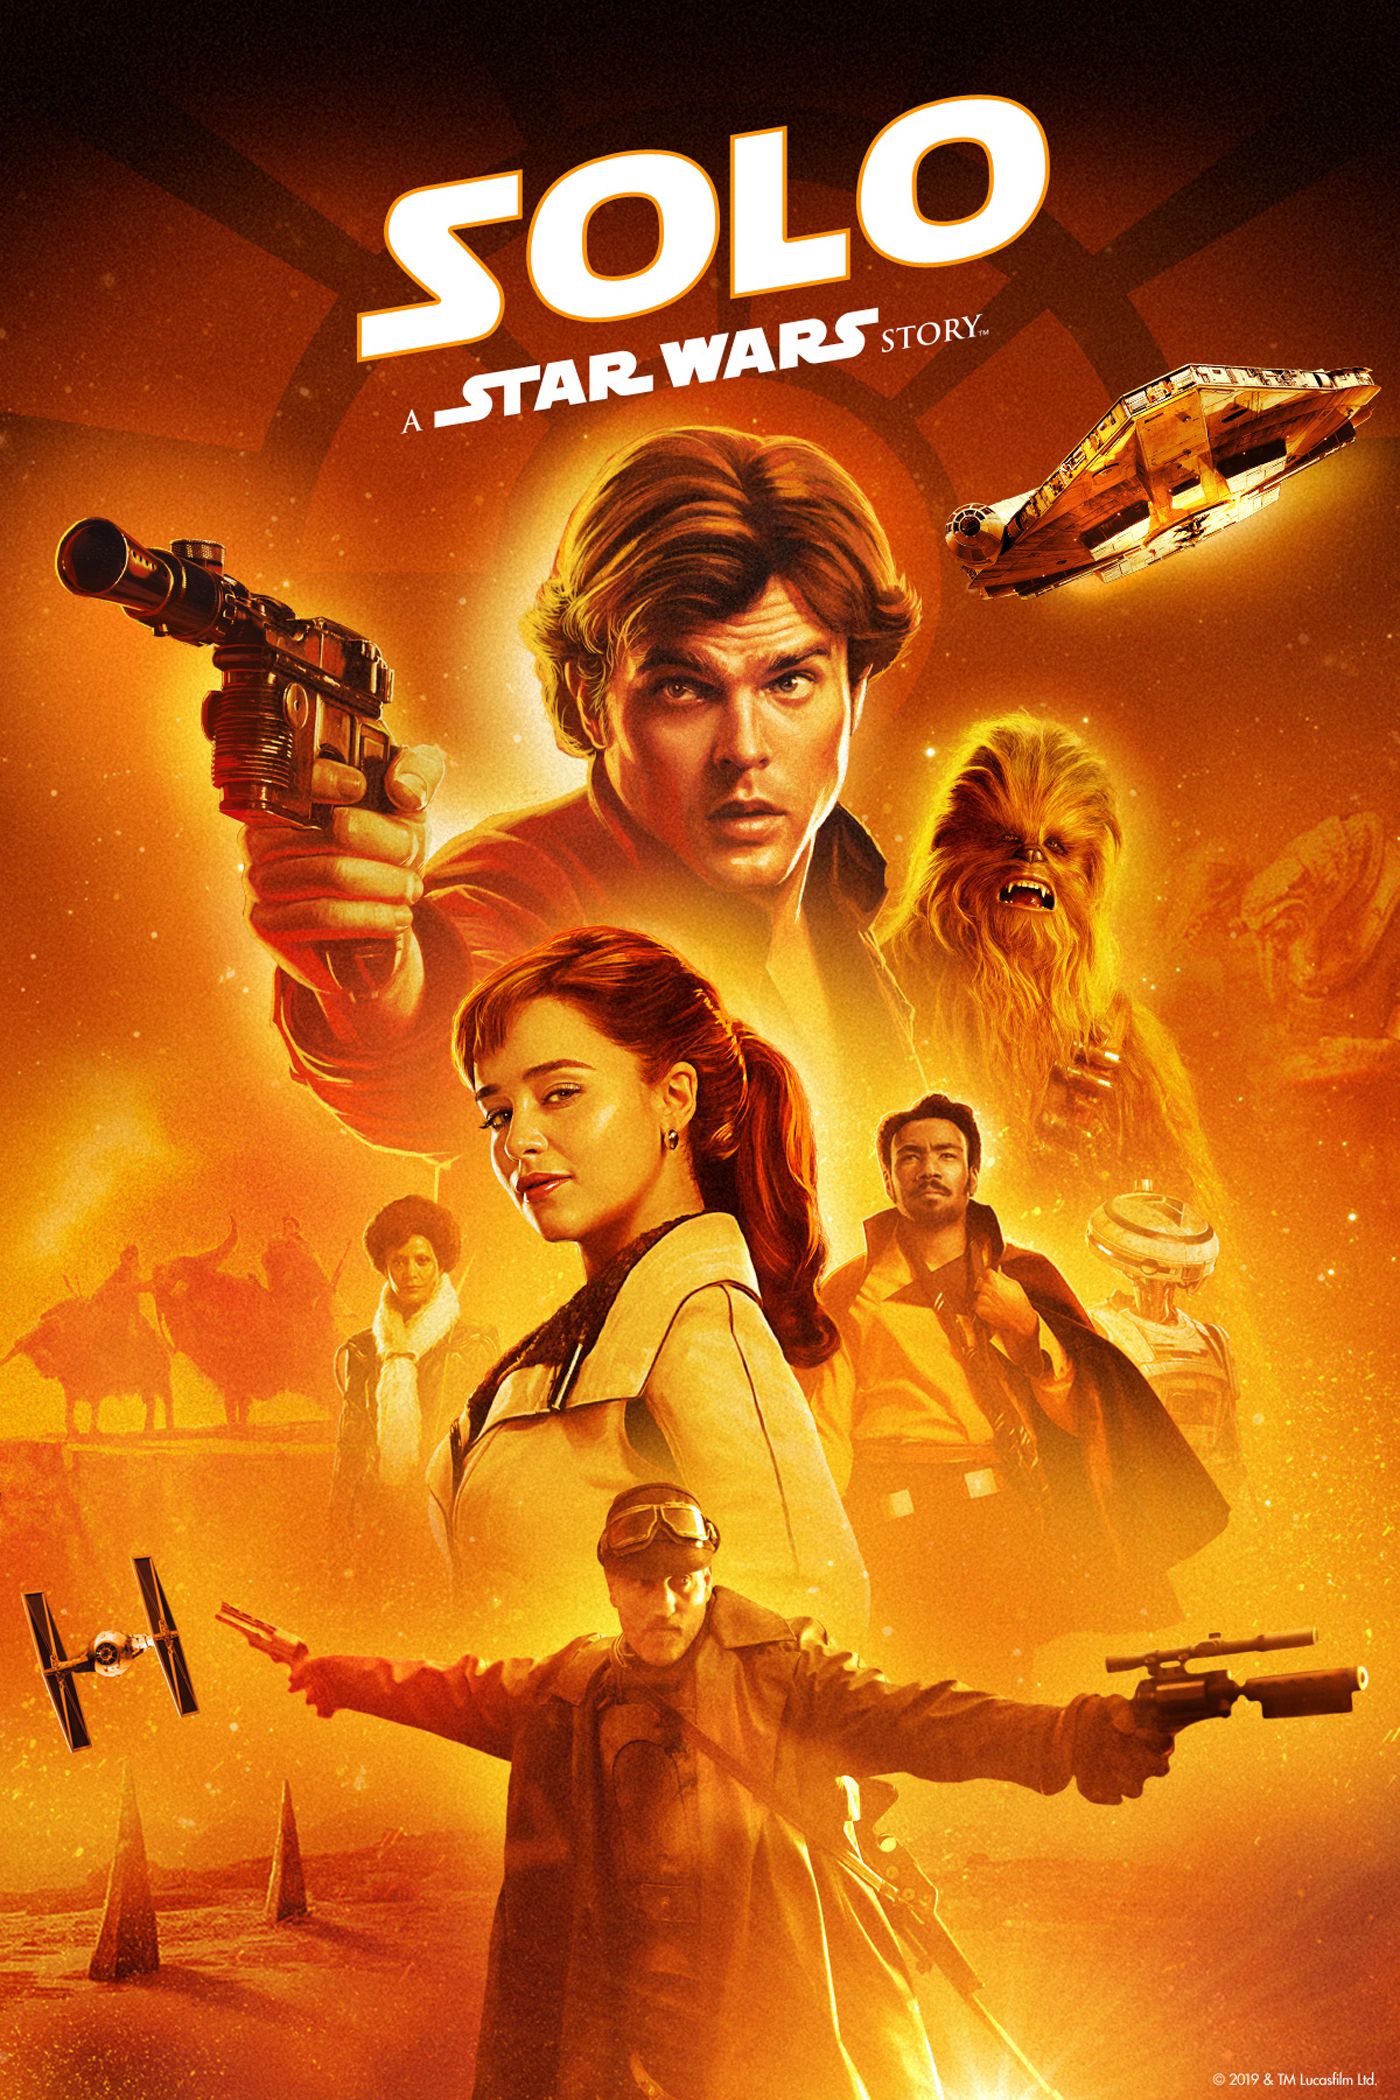 watch star wars the force awakens on youtubeonfire